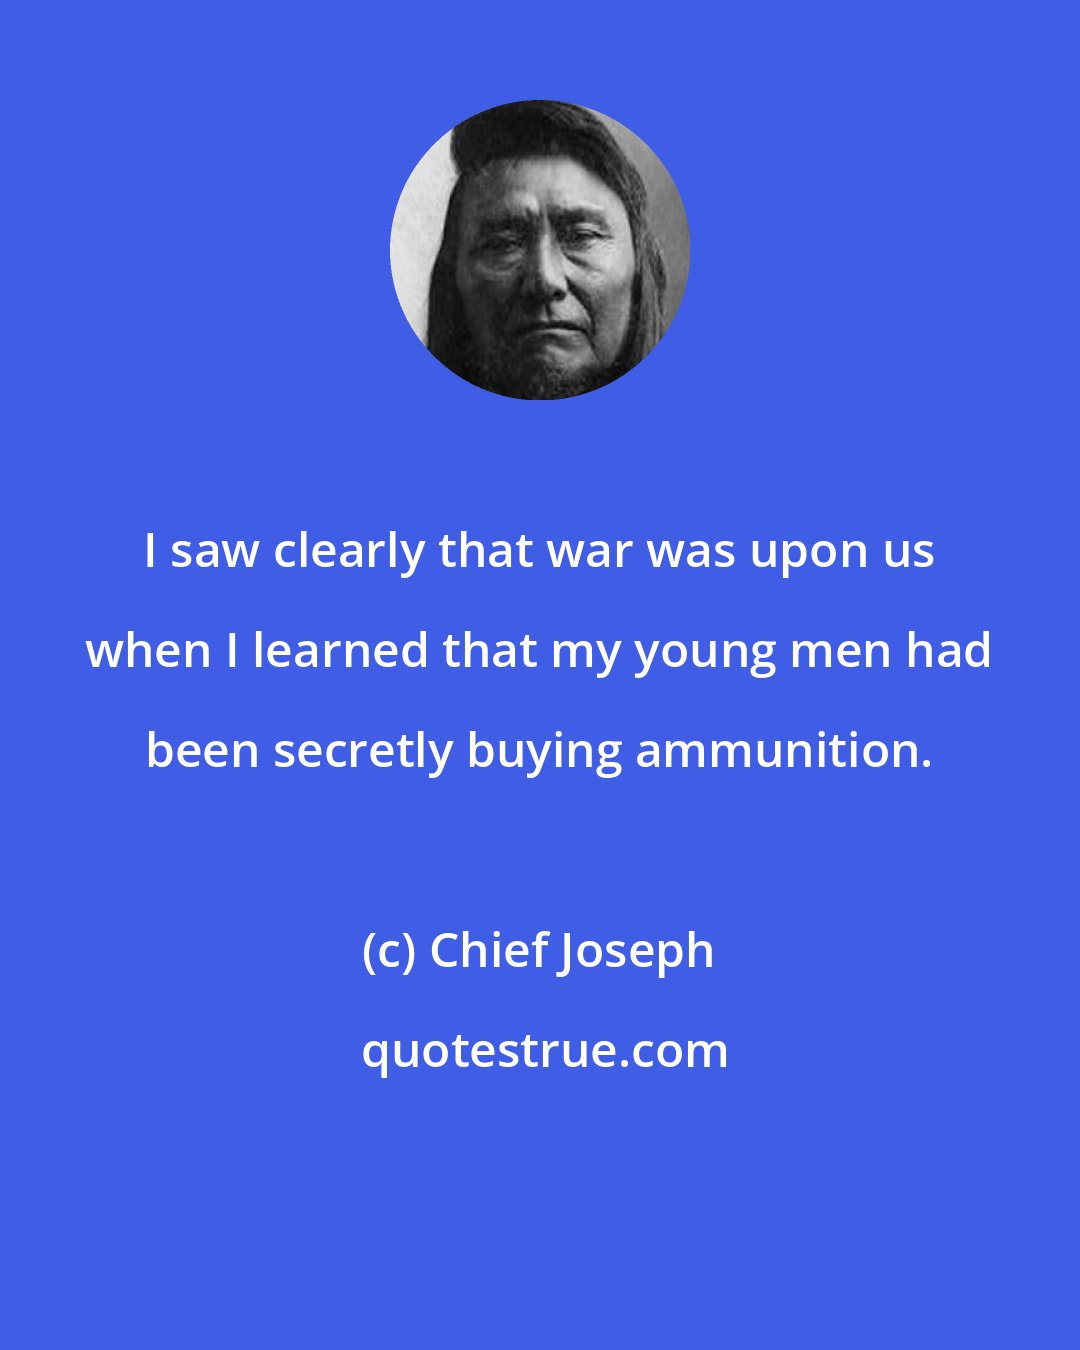 Chief Joseph: I saw clearly that war was upon us when I learned that my young men had been secretly buying ammunition.